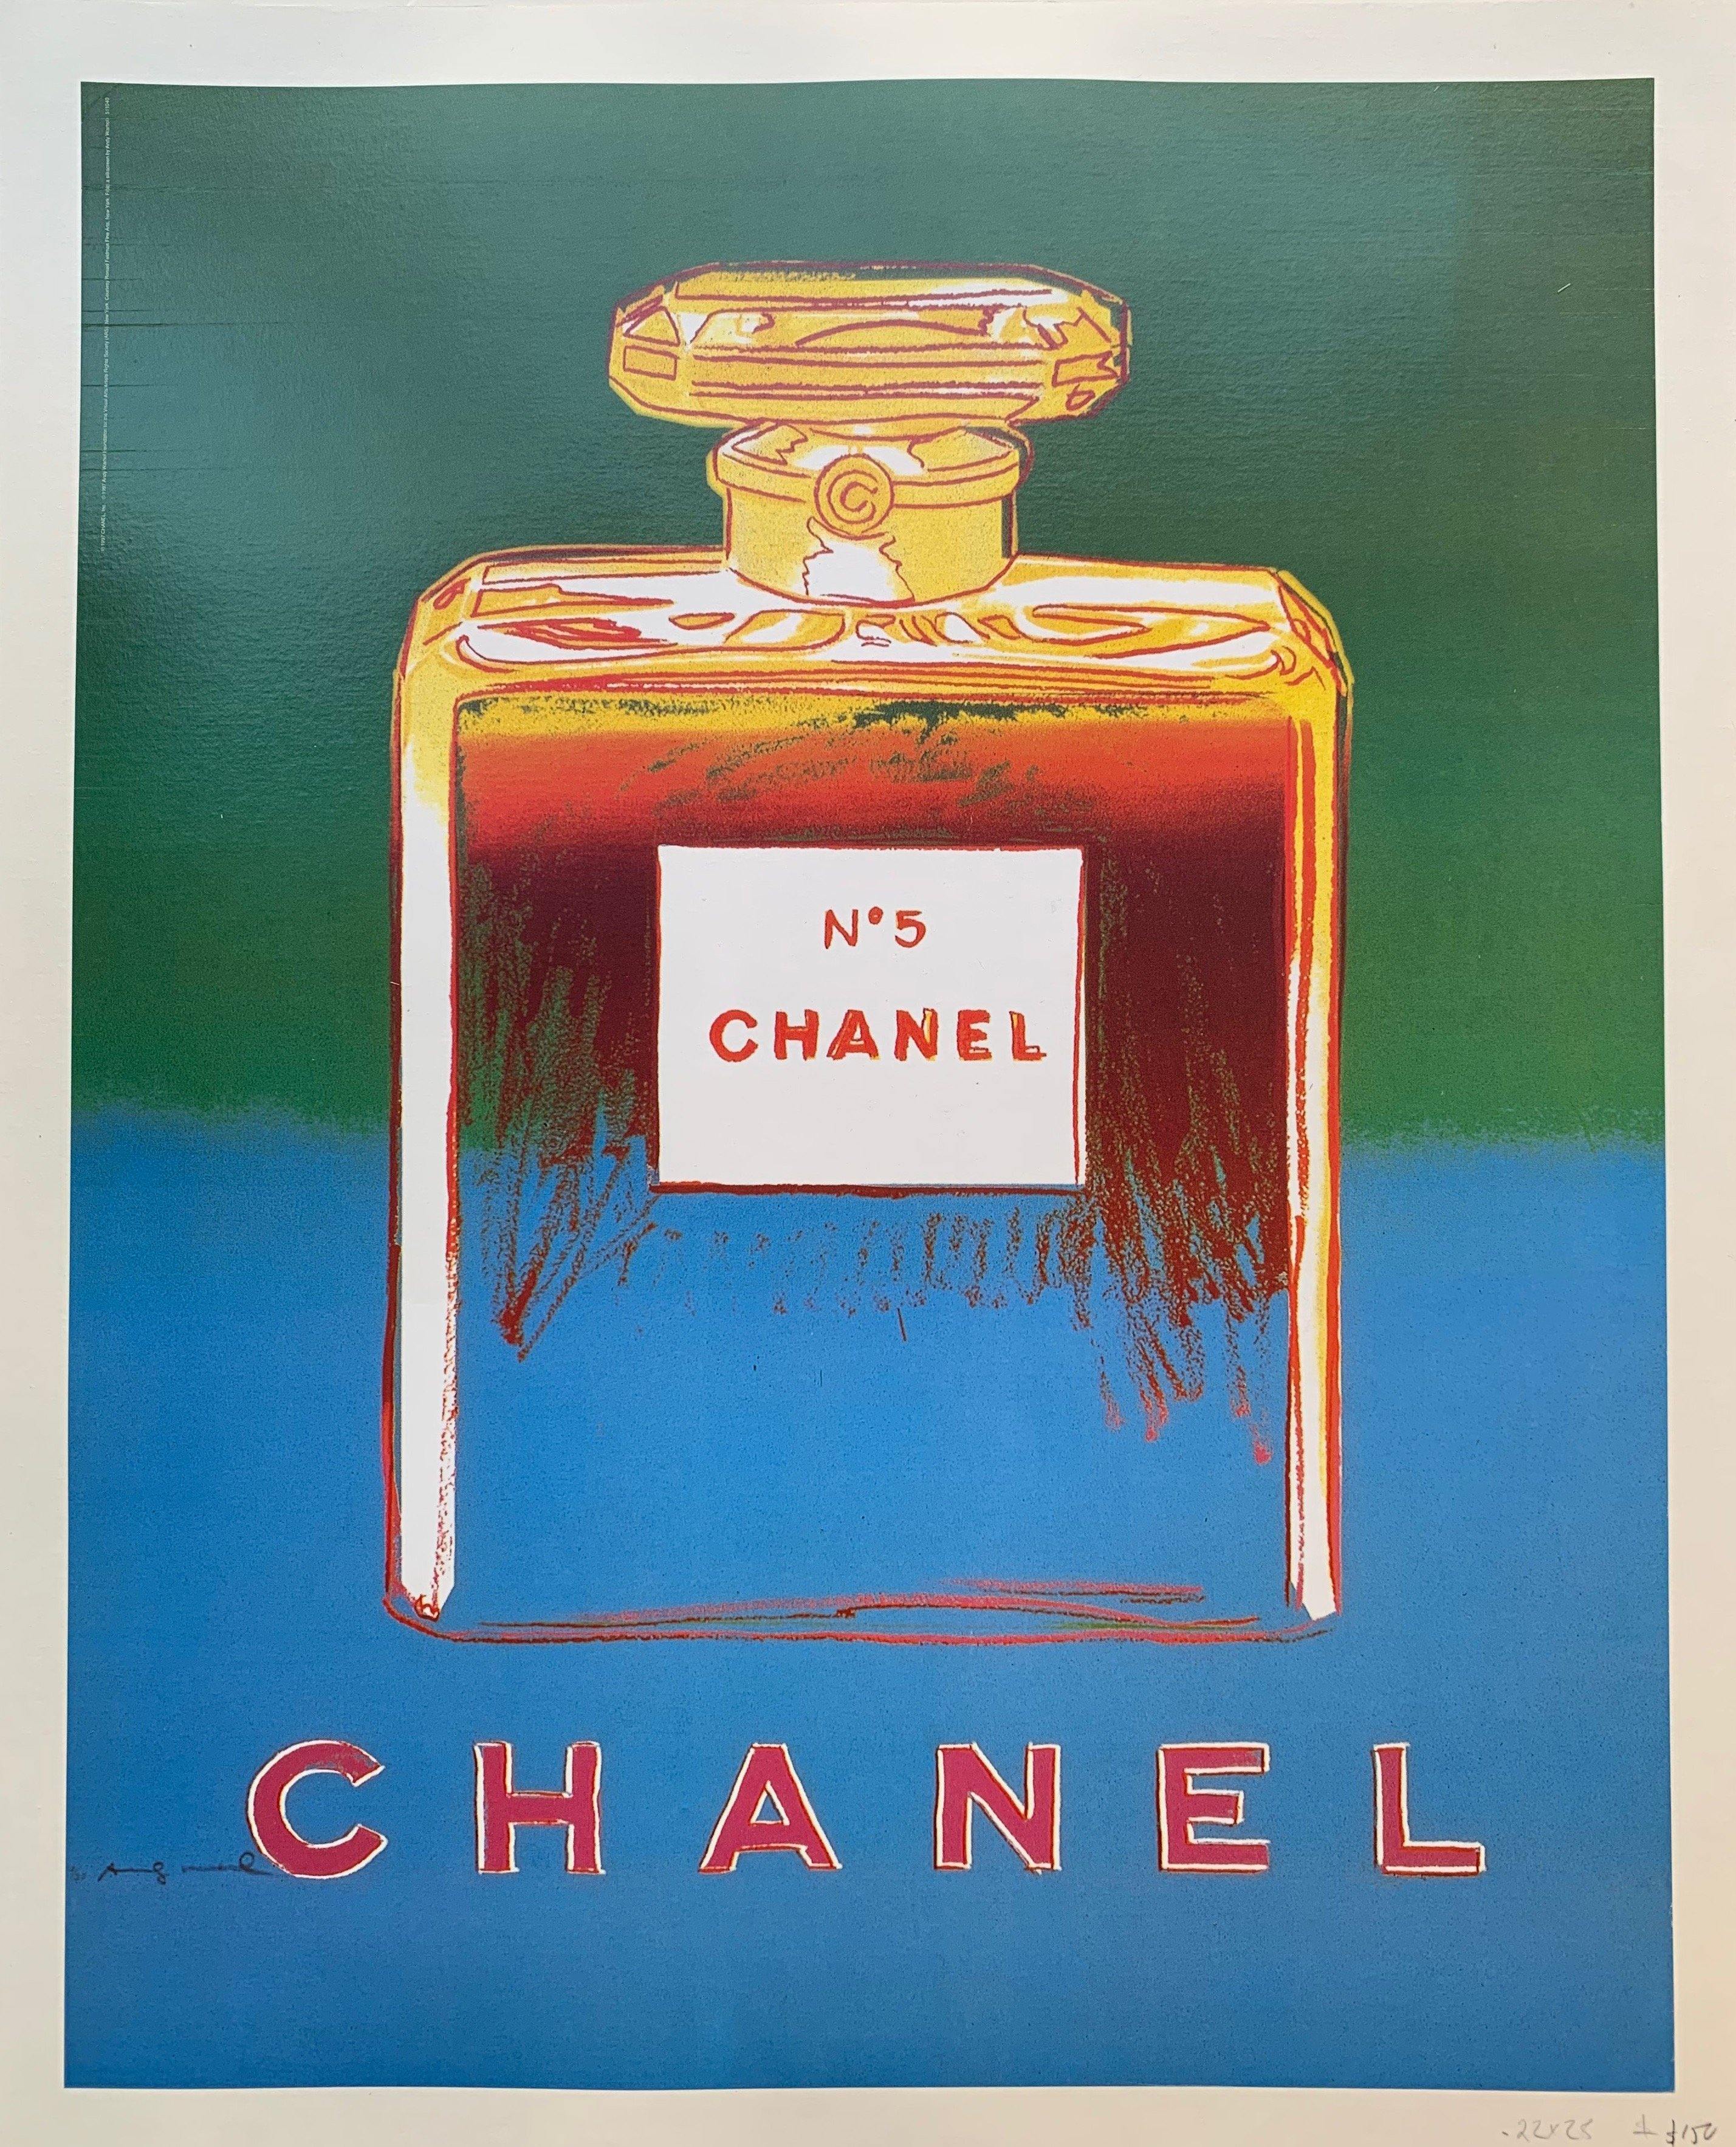 No 5 Chanel Blue/Green Poster Museum